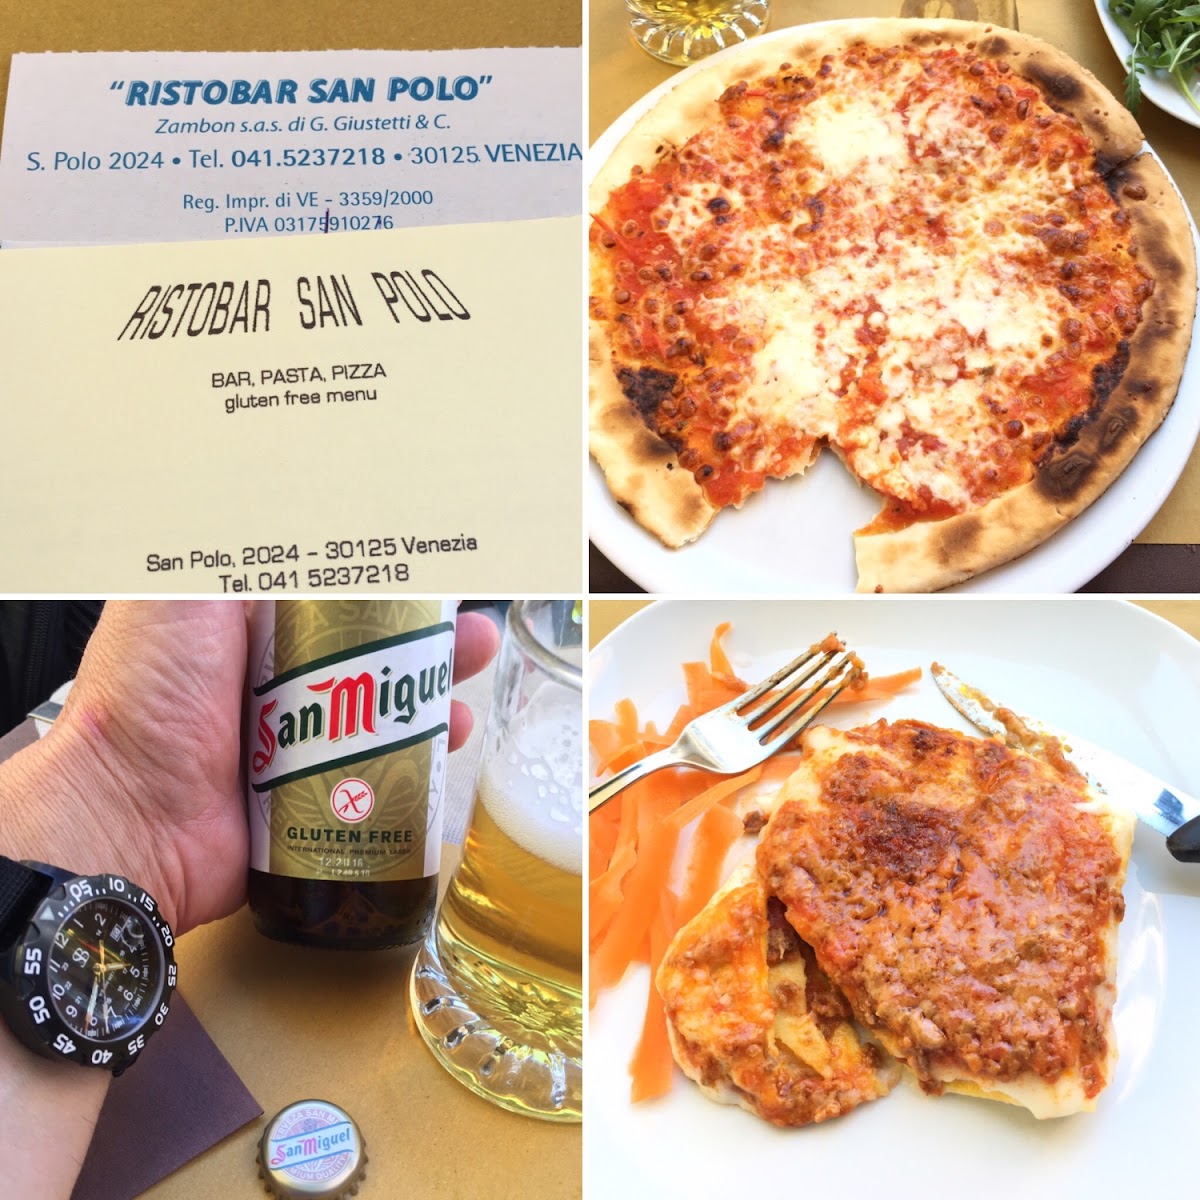 Excellent GF pizza and pasta (and beer)